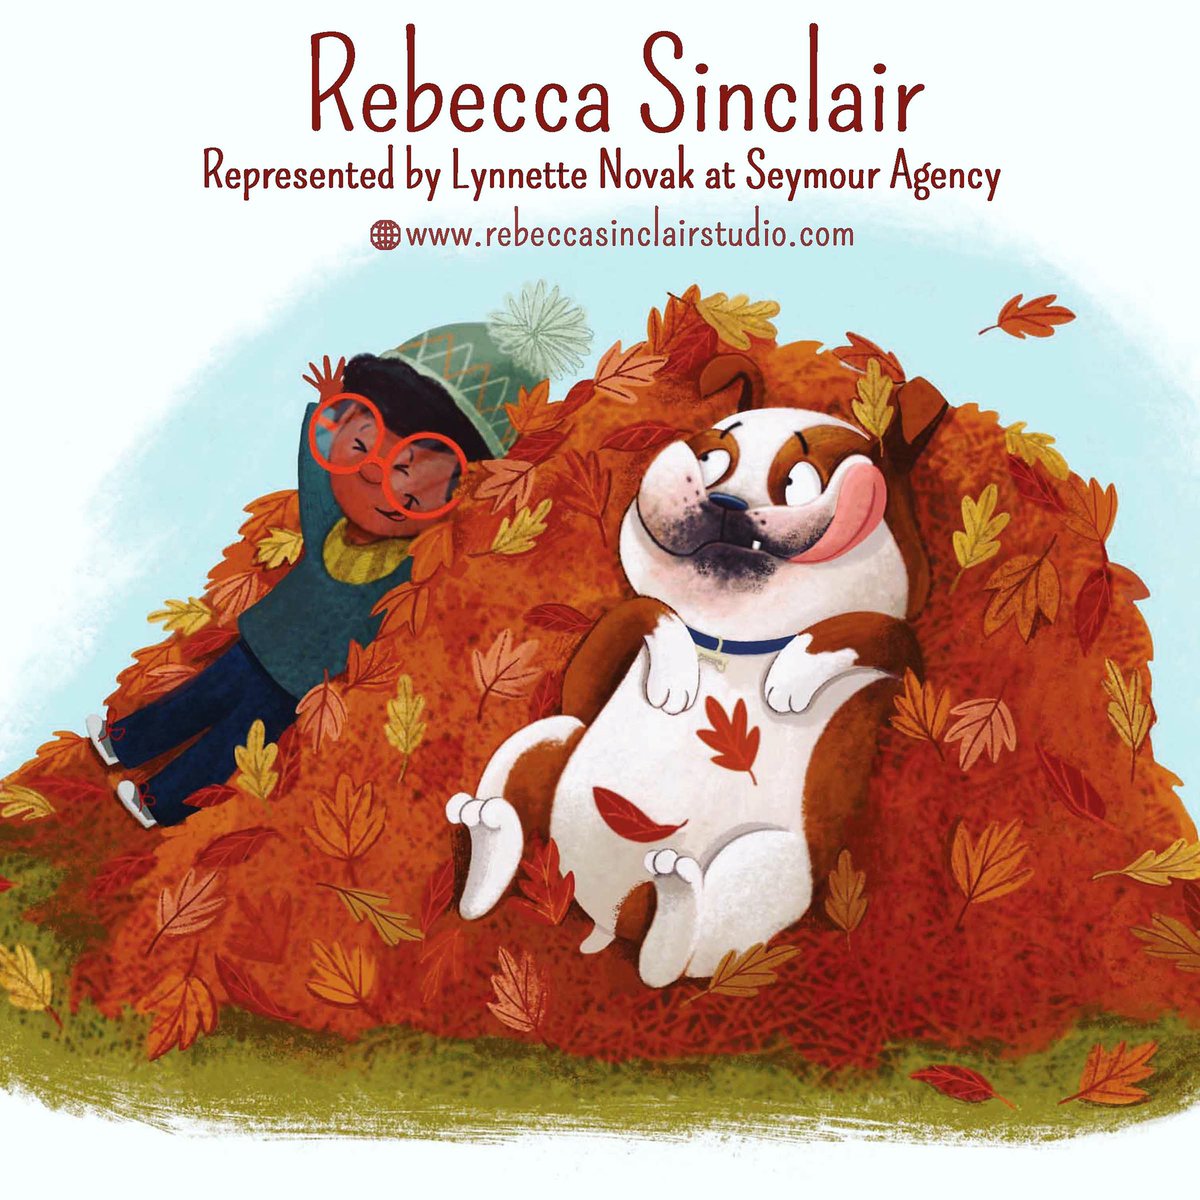 Jumping into November with another #kidlitartpostcard day! 🍂 I’m Rebecca, a #kidlitartist who enjoys creating fun and often silly scenes involving four-legged friends. 💼 rebeccasinclairstudio.com For picture or board book inquires, contact @Lynnette_Novak at @seymouragency